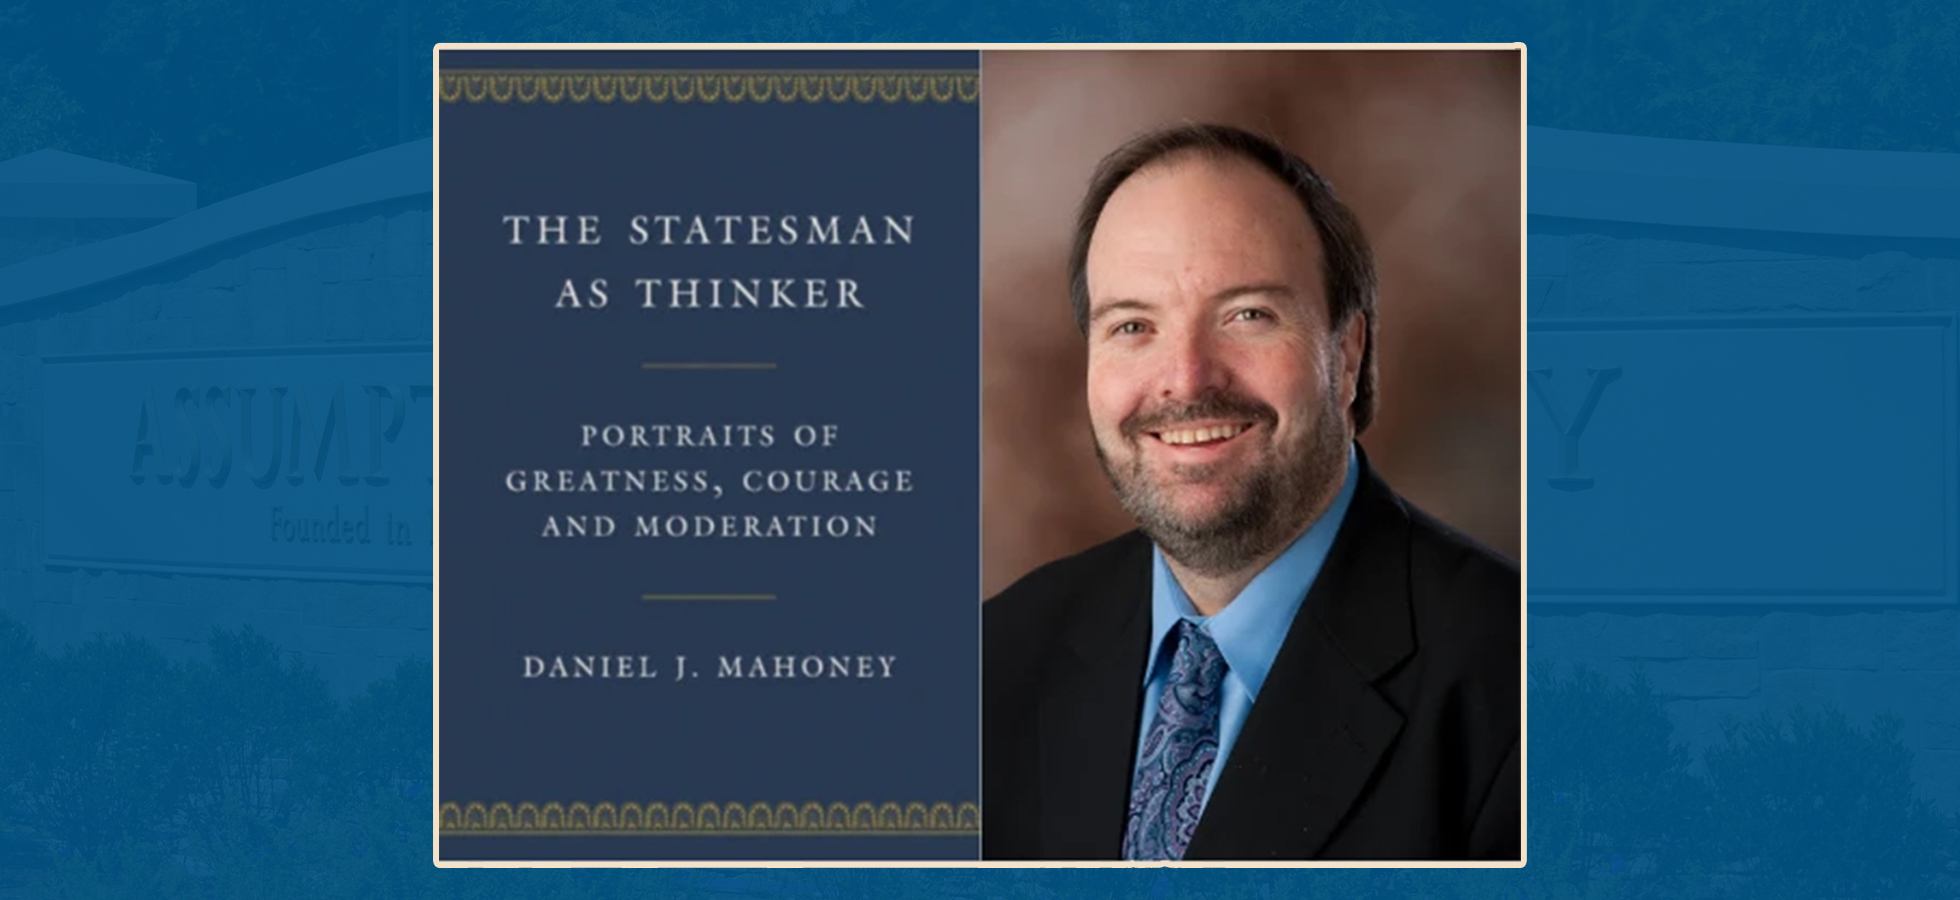 Daniel J. Mahoney, Assumption University Political Science Professor Emeritus, won the 2023 Intercollegiate Studies Institute Paolucci Award for Conservative Book of the Year for his novel: The Statesman as Thinker: Portraits of Greatness, Courage, and Moderation.